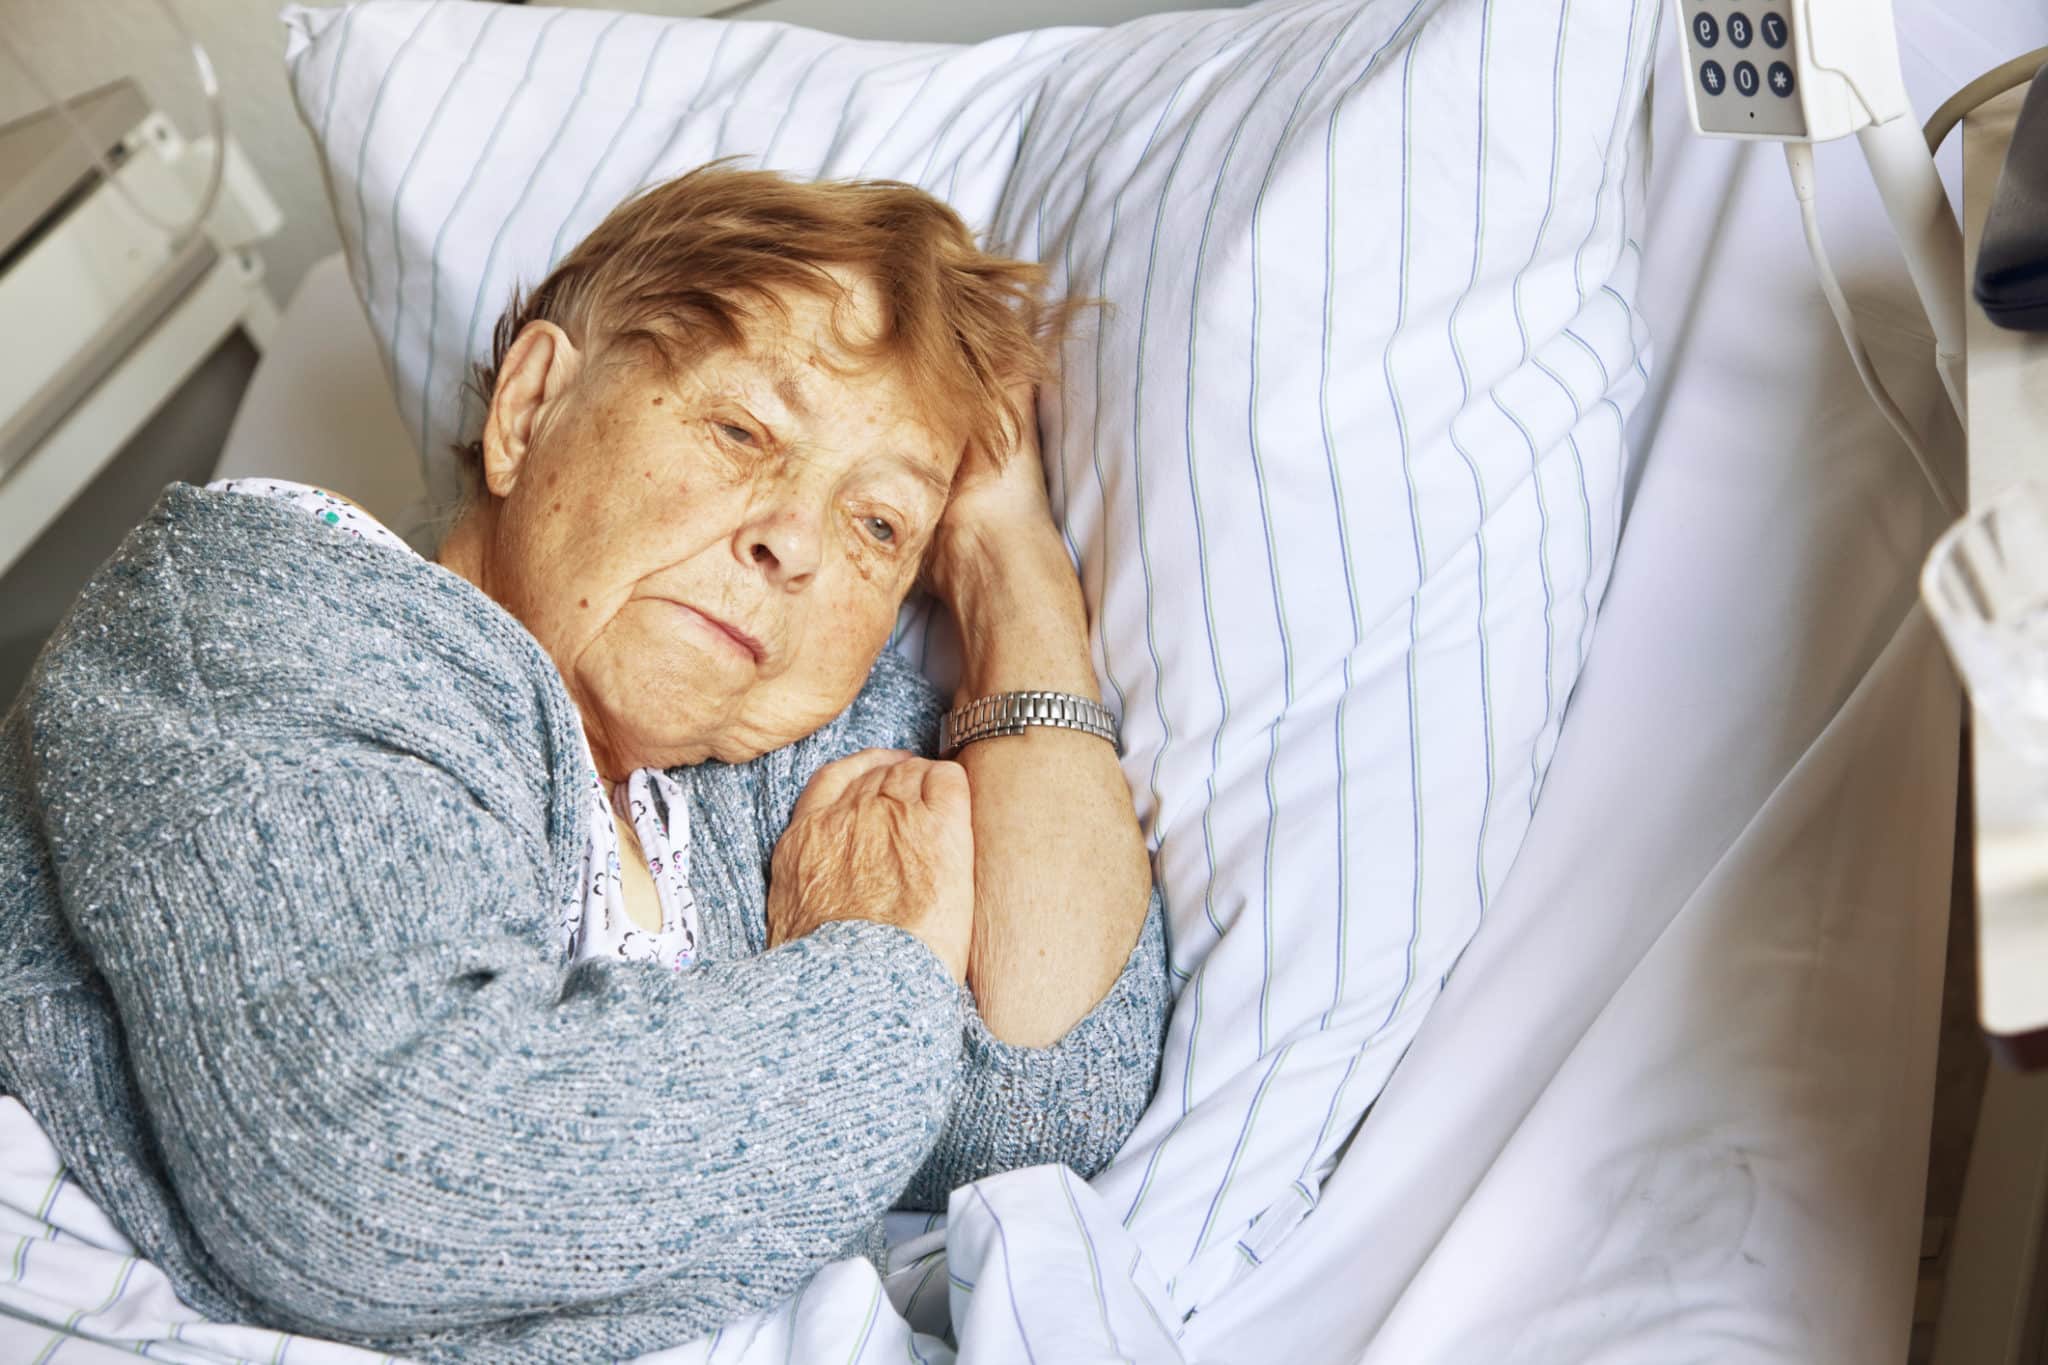 A Huntington, WV woman lays in a hospital bed after suffering elder abuse.